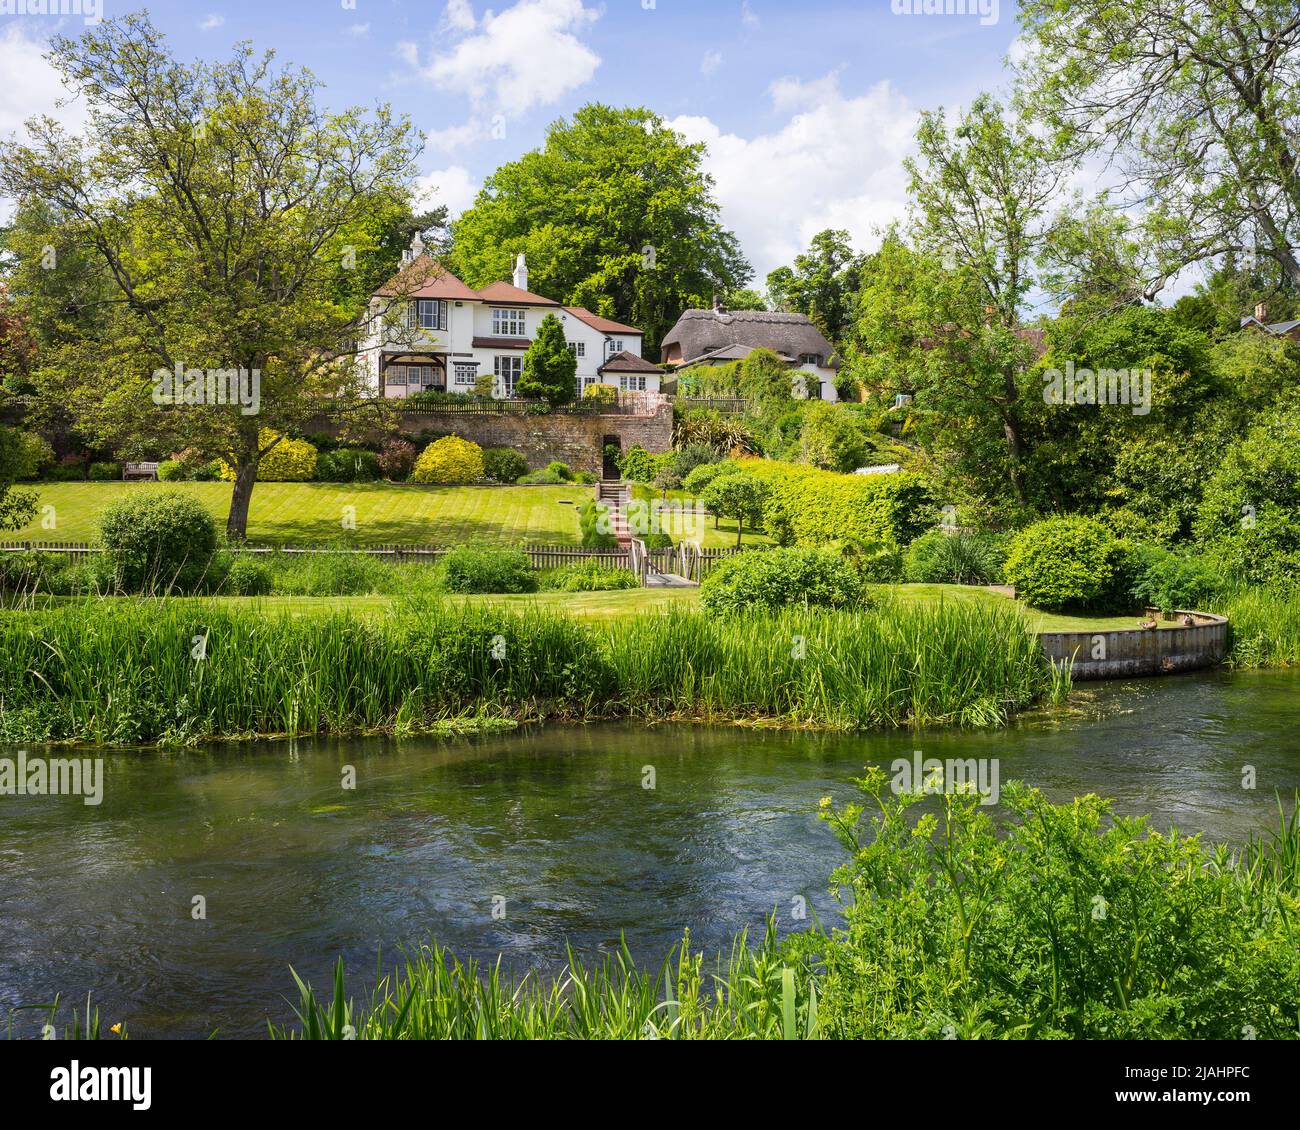 Riverside houses and gardens on the bank of the River Itchen at Shawford, Hampshire, England. Stock Photo